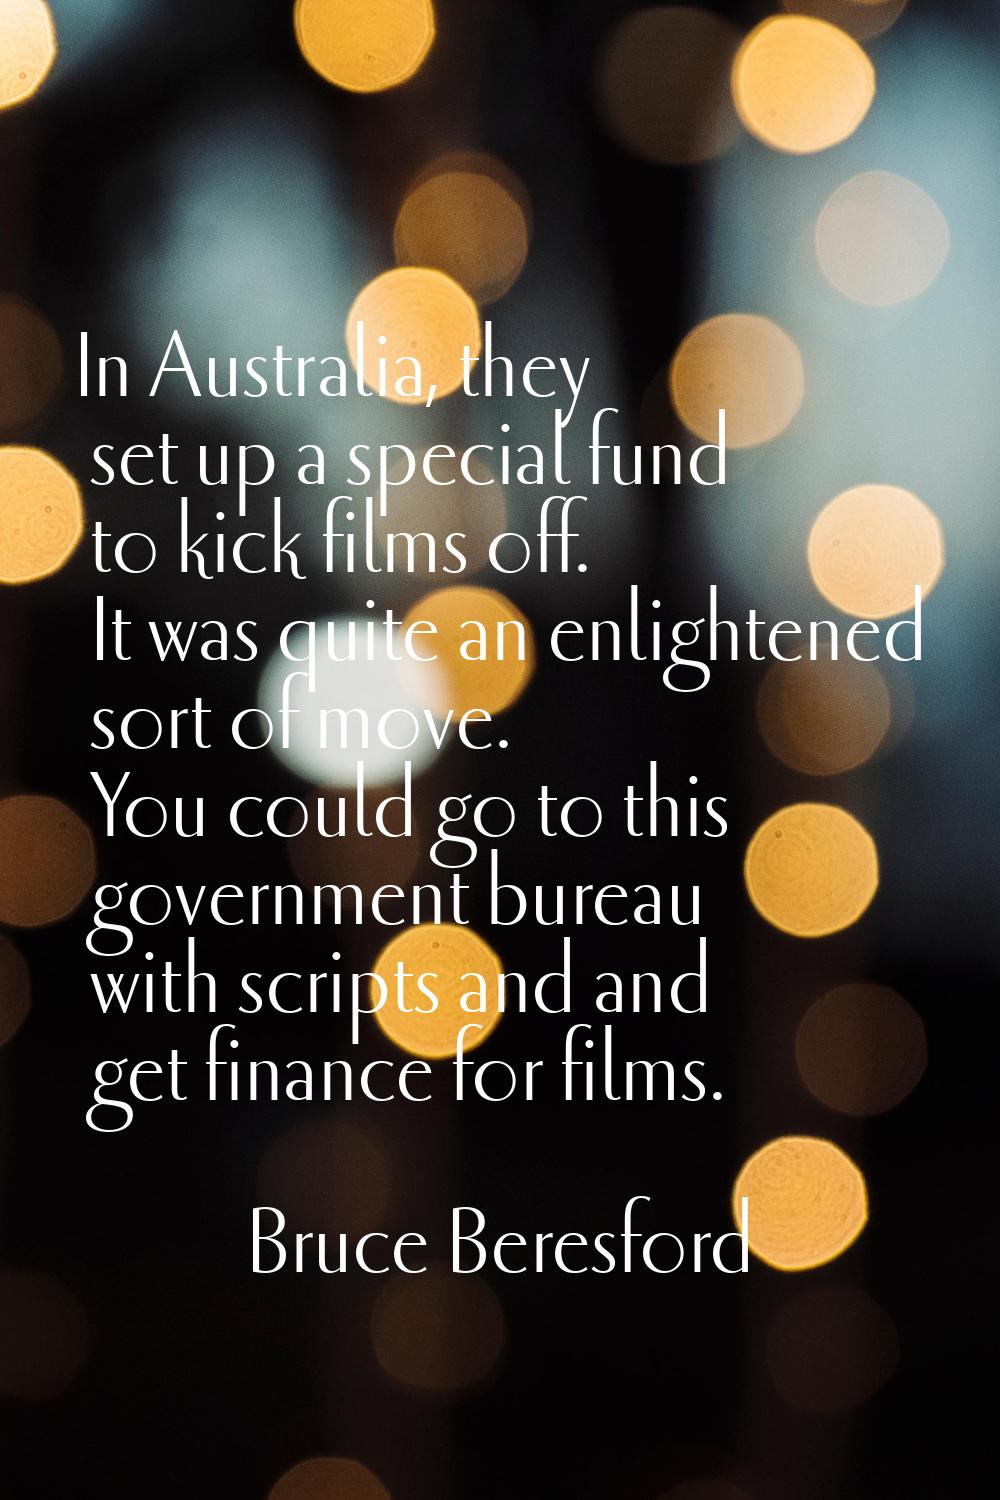 In Australia, they set up a special fund to kick films off. It was quite an enlightened sort of mov